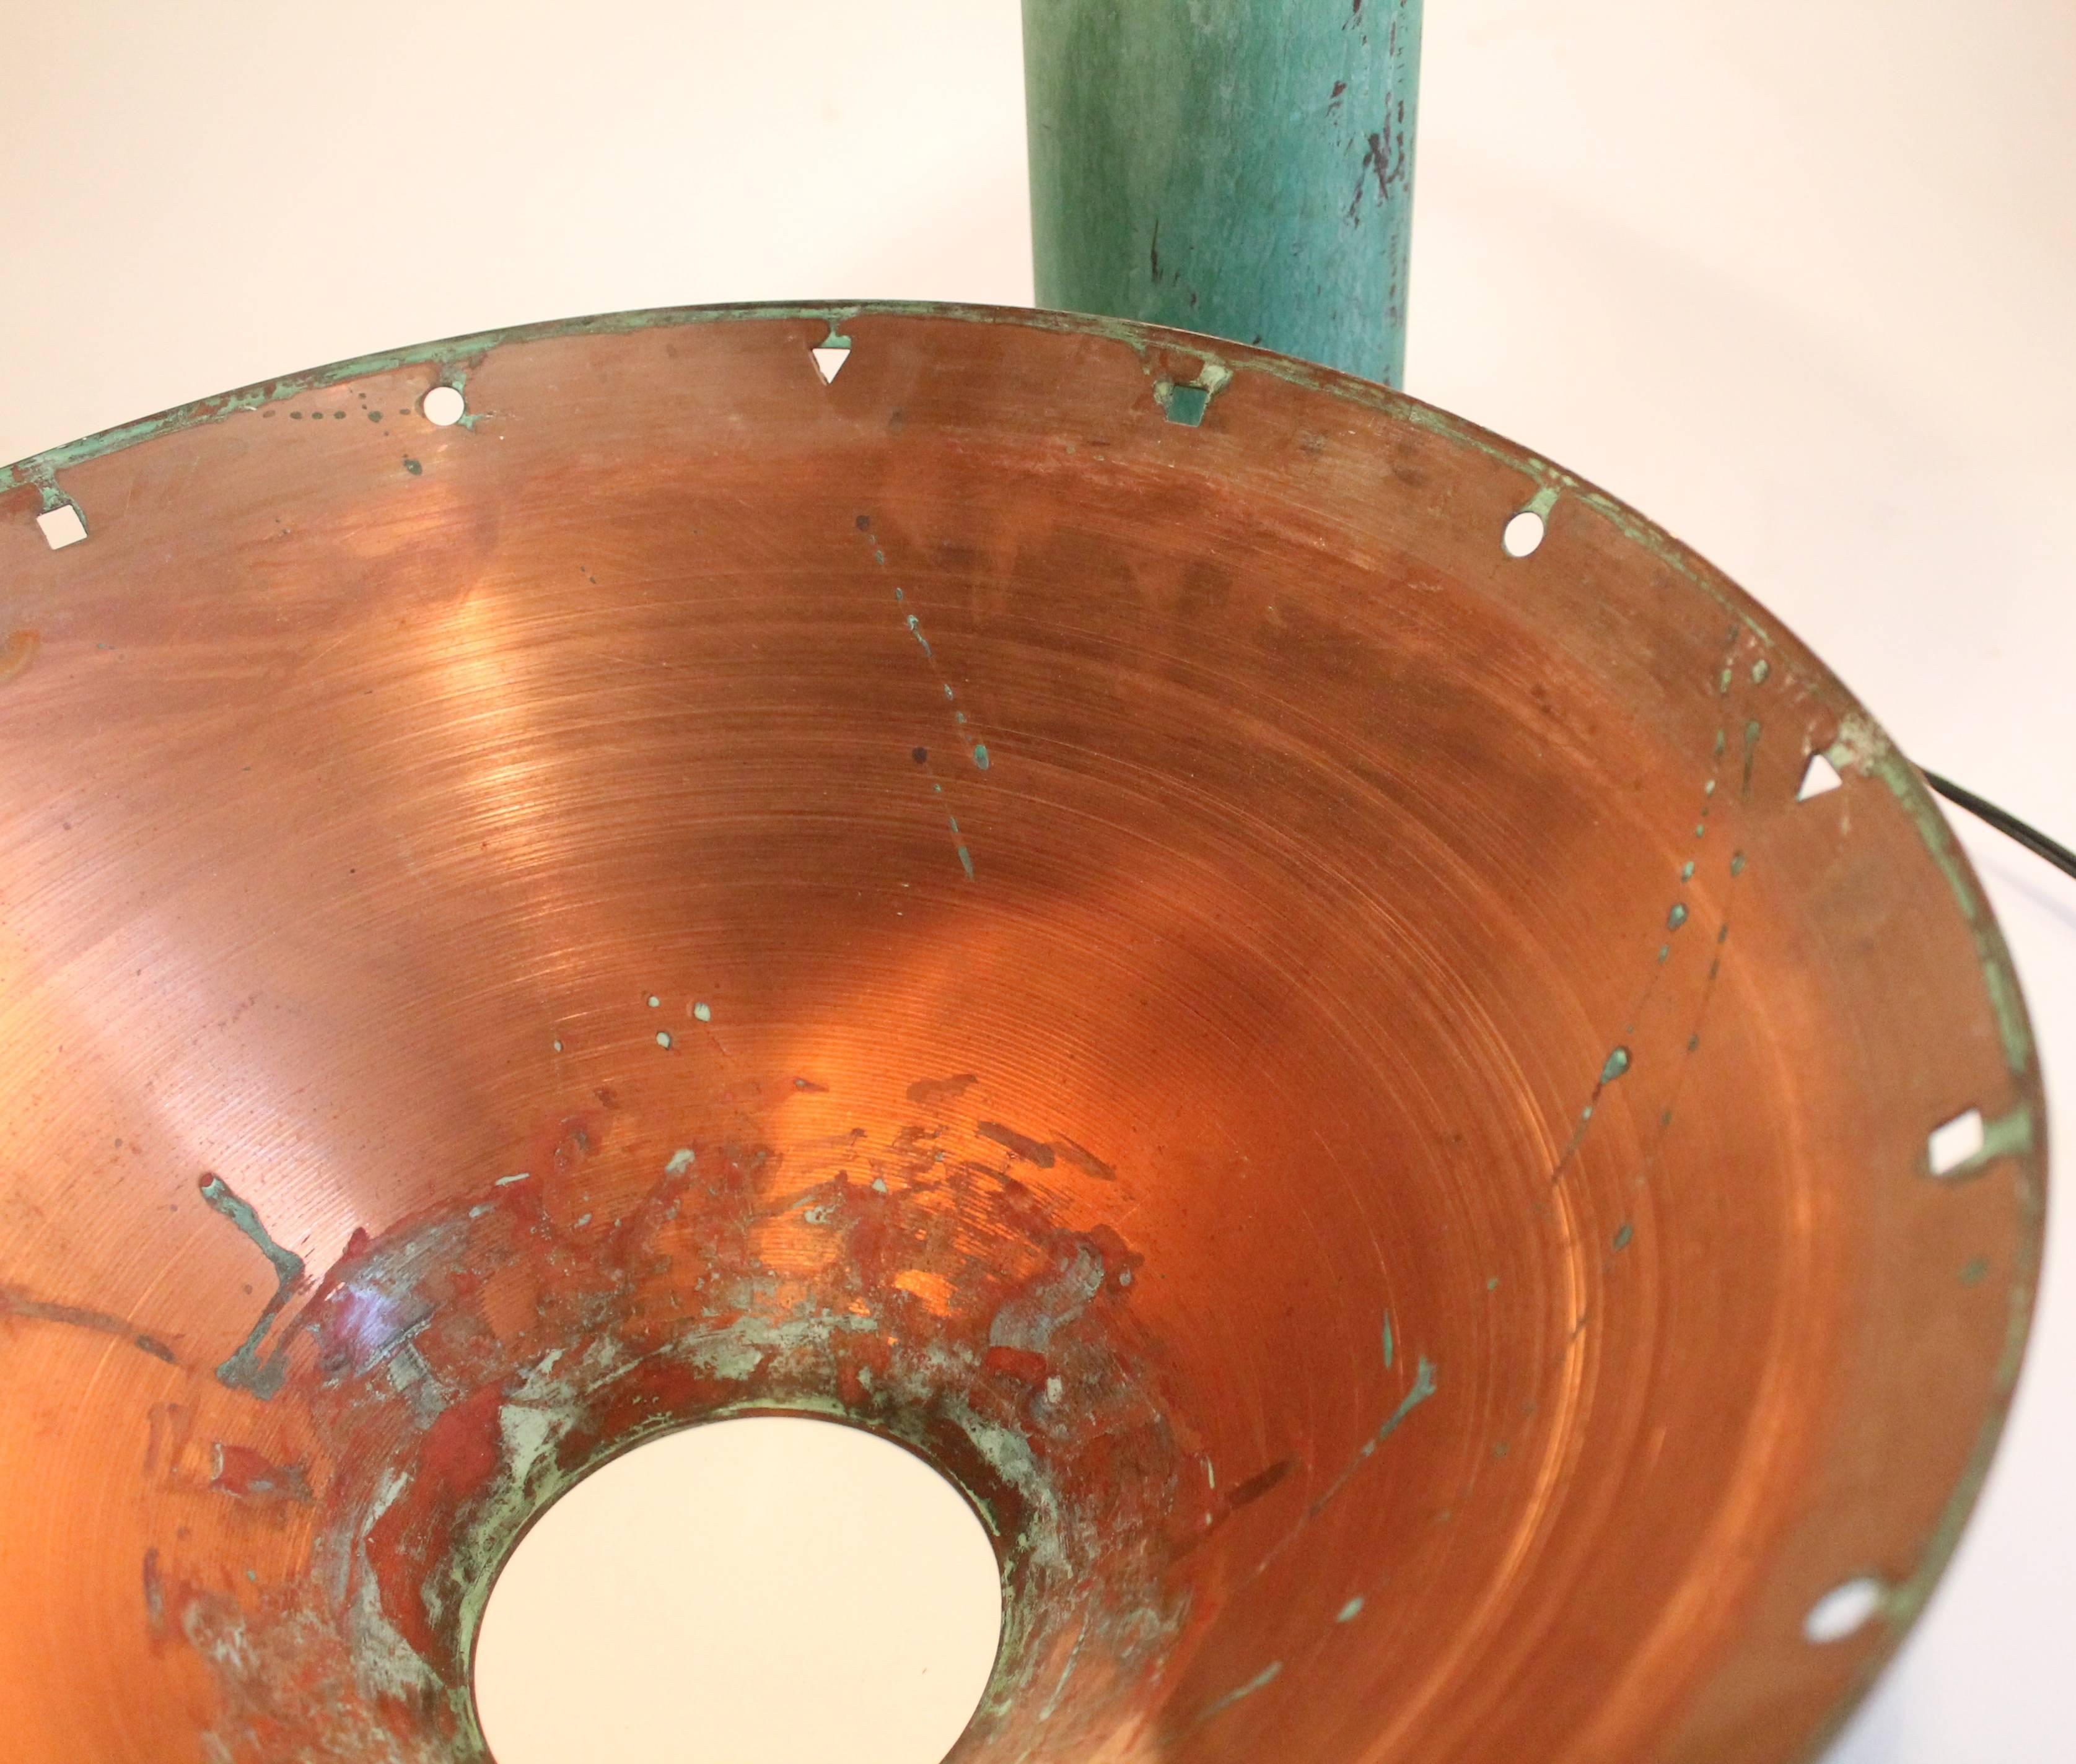 Patinated Ron Rezek Copper with a Verdigras Green Patina Table Lamp